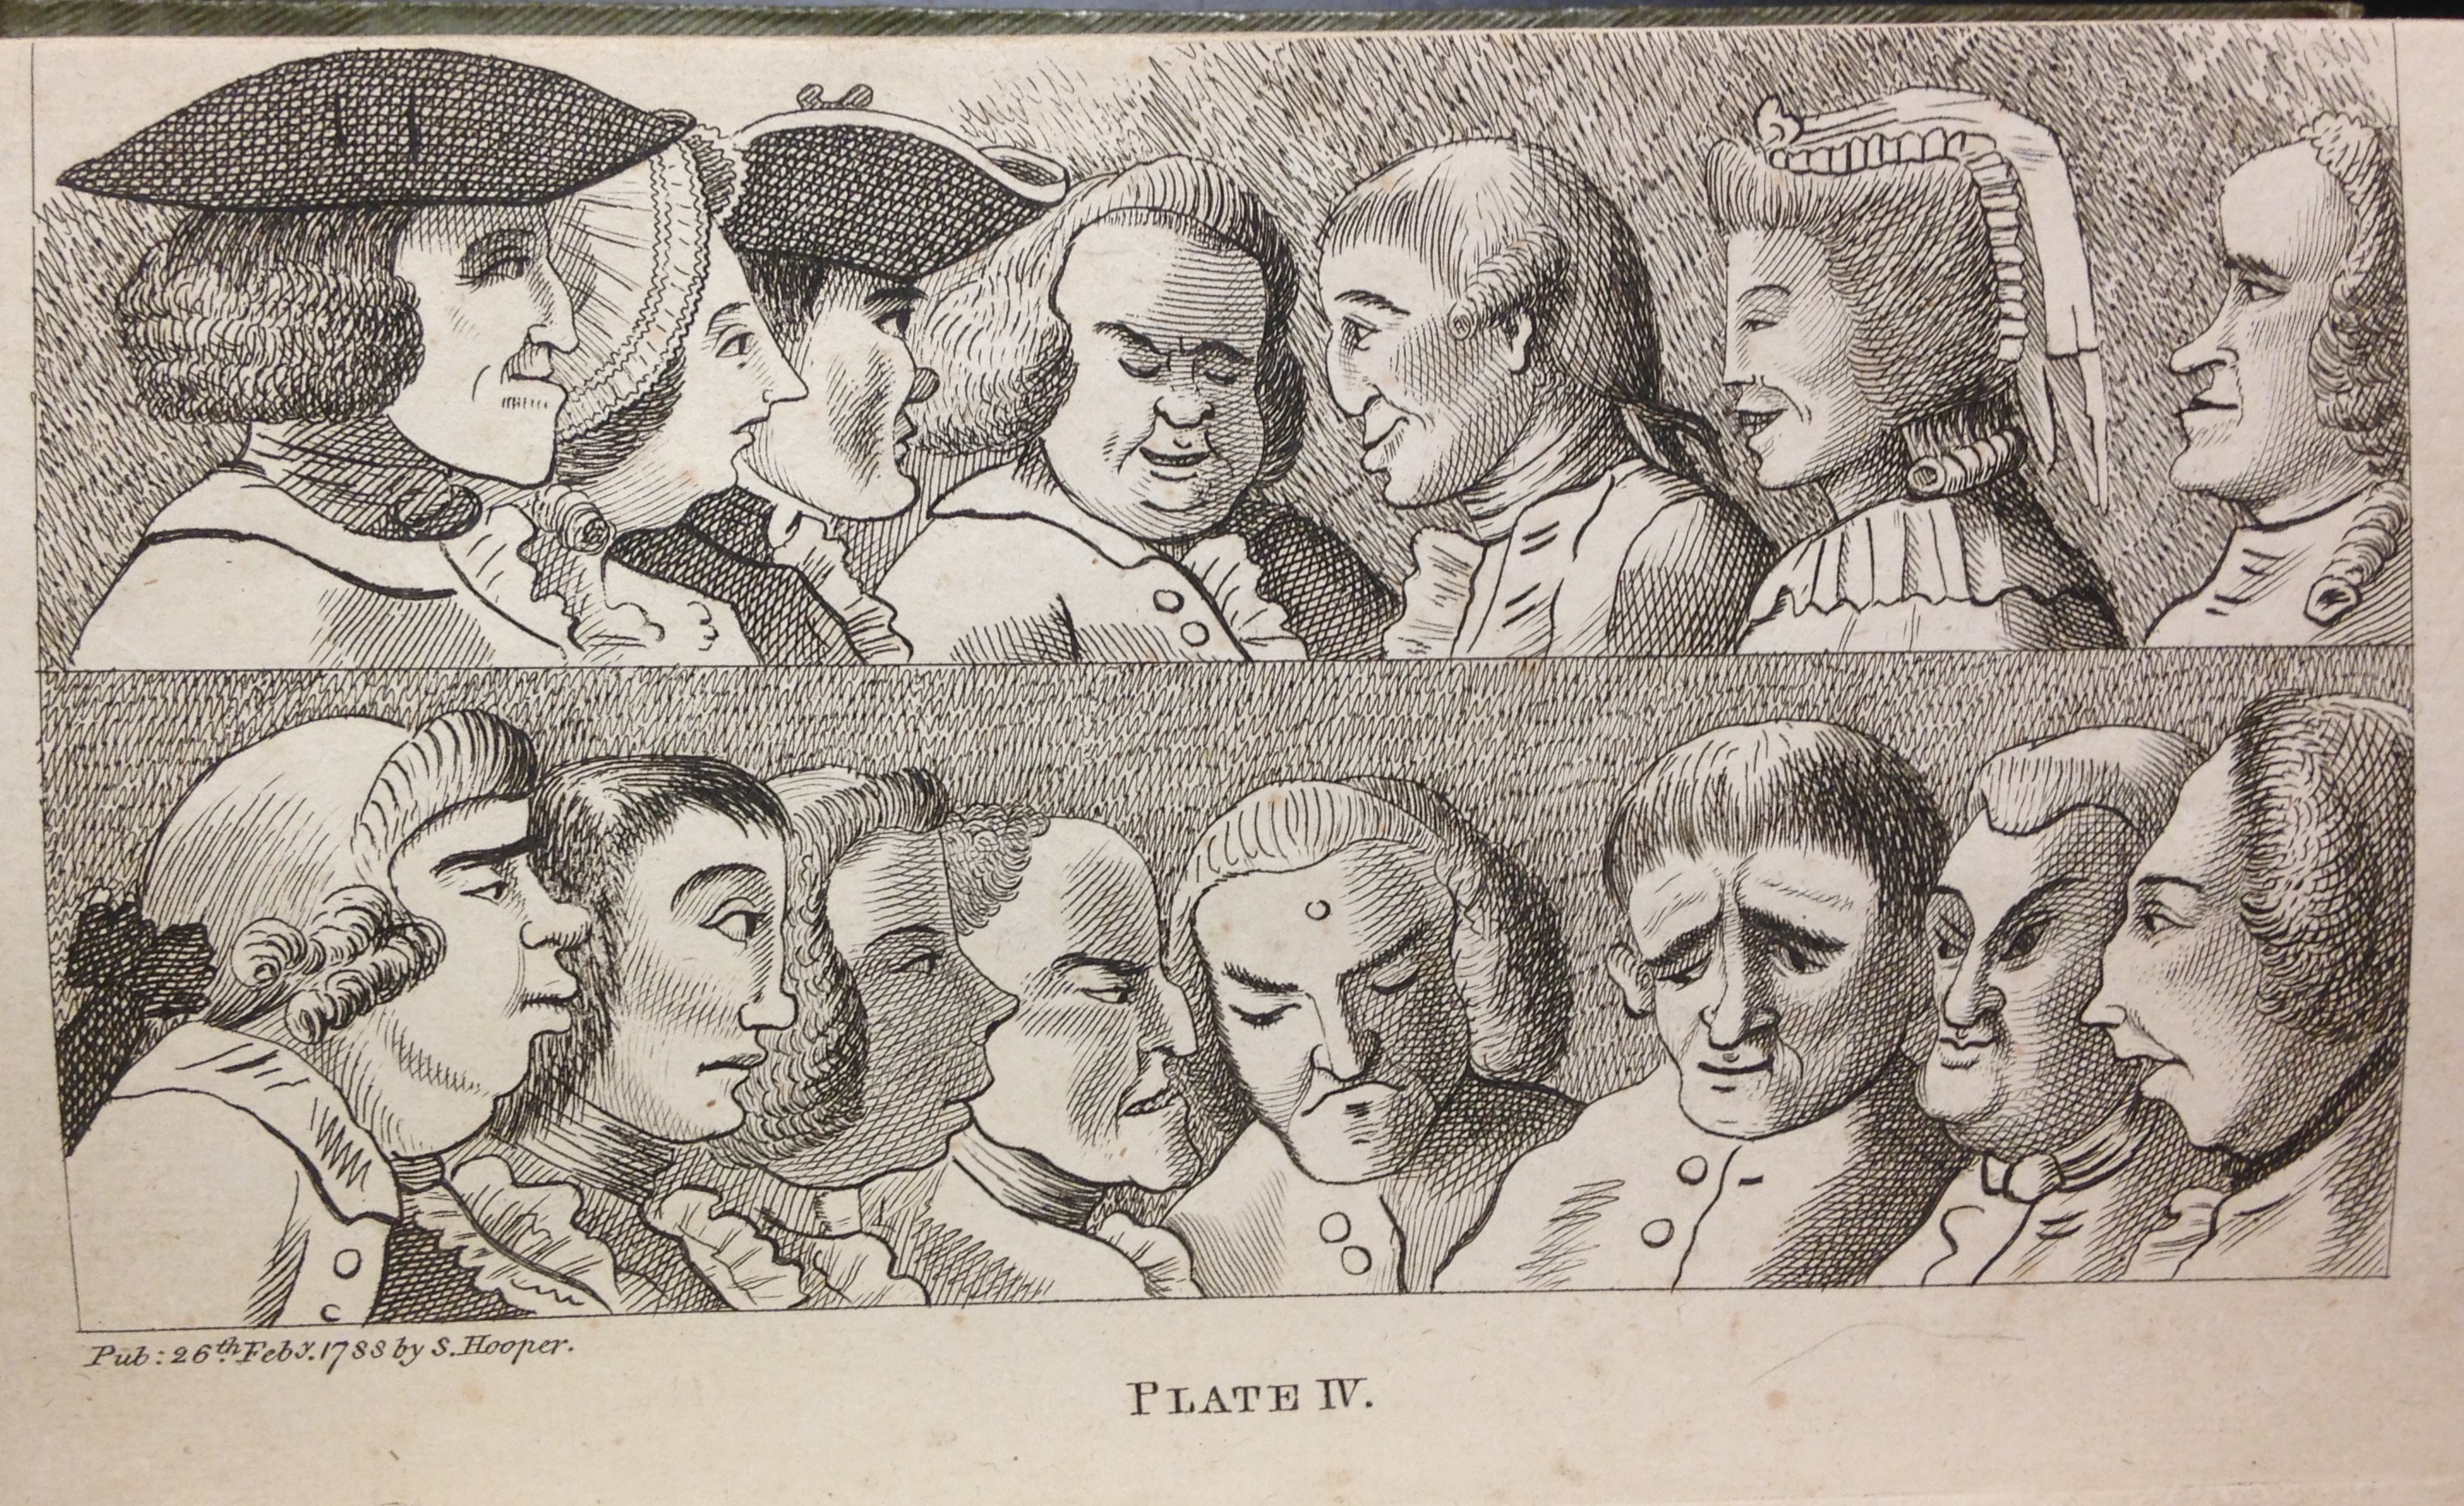 A lesson in caricature: examples of various noses, profiles, and head shapes. Francis Grose, Rules for drawing caricaturas, 2nd ed. (London, 1796), plate IV.   (NC1320 .G76 1796)